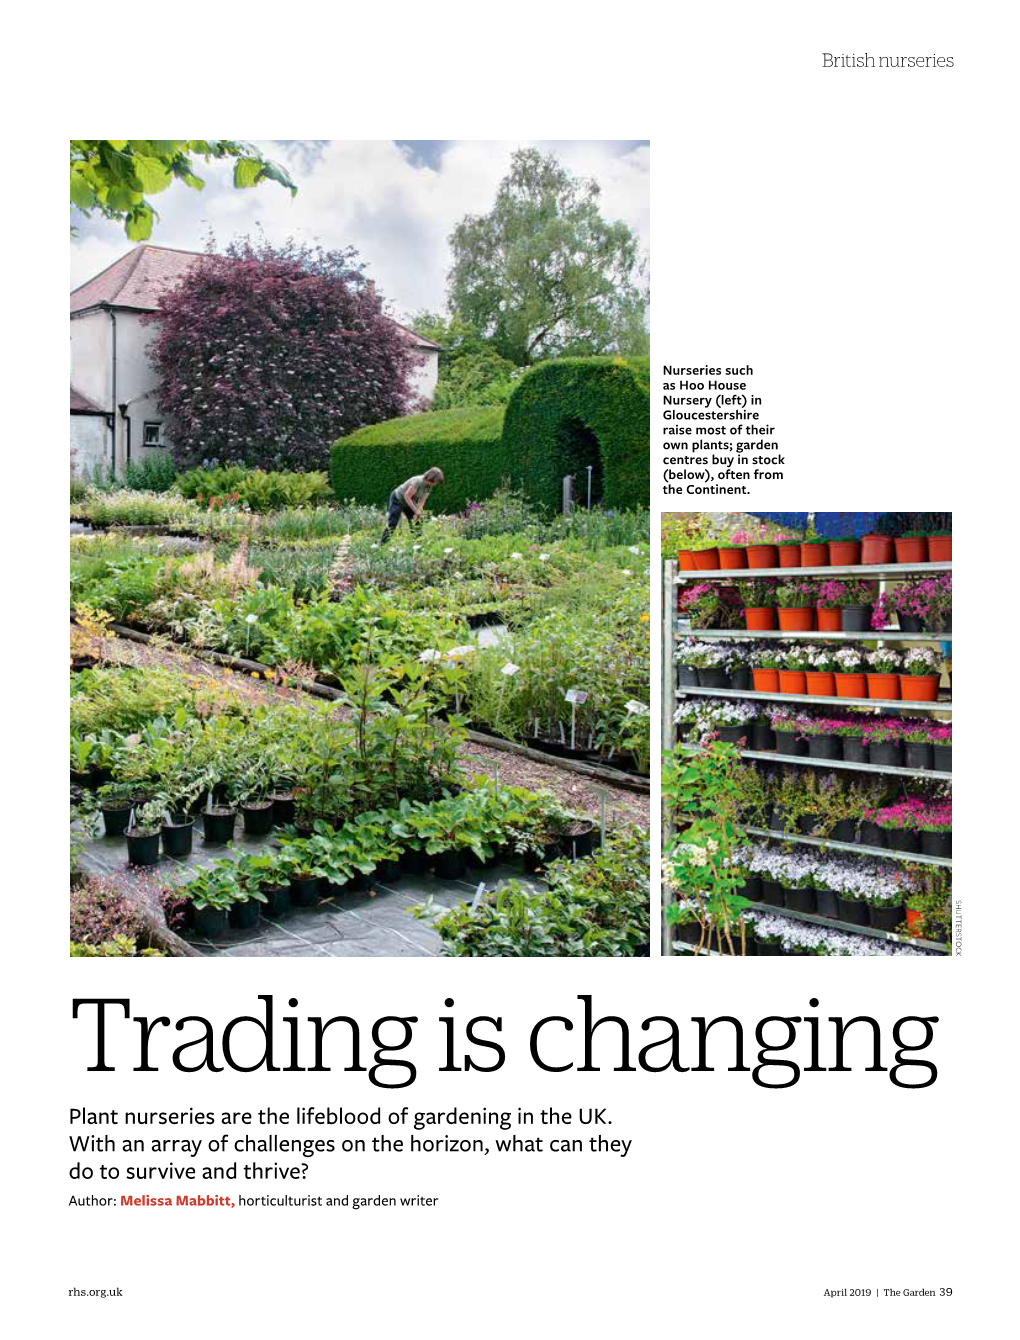 Trading Is Changing Plant Nurseries Are the Lifeblood of Gardening in the UK